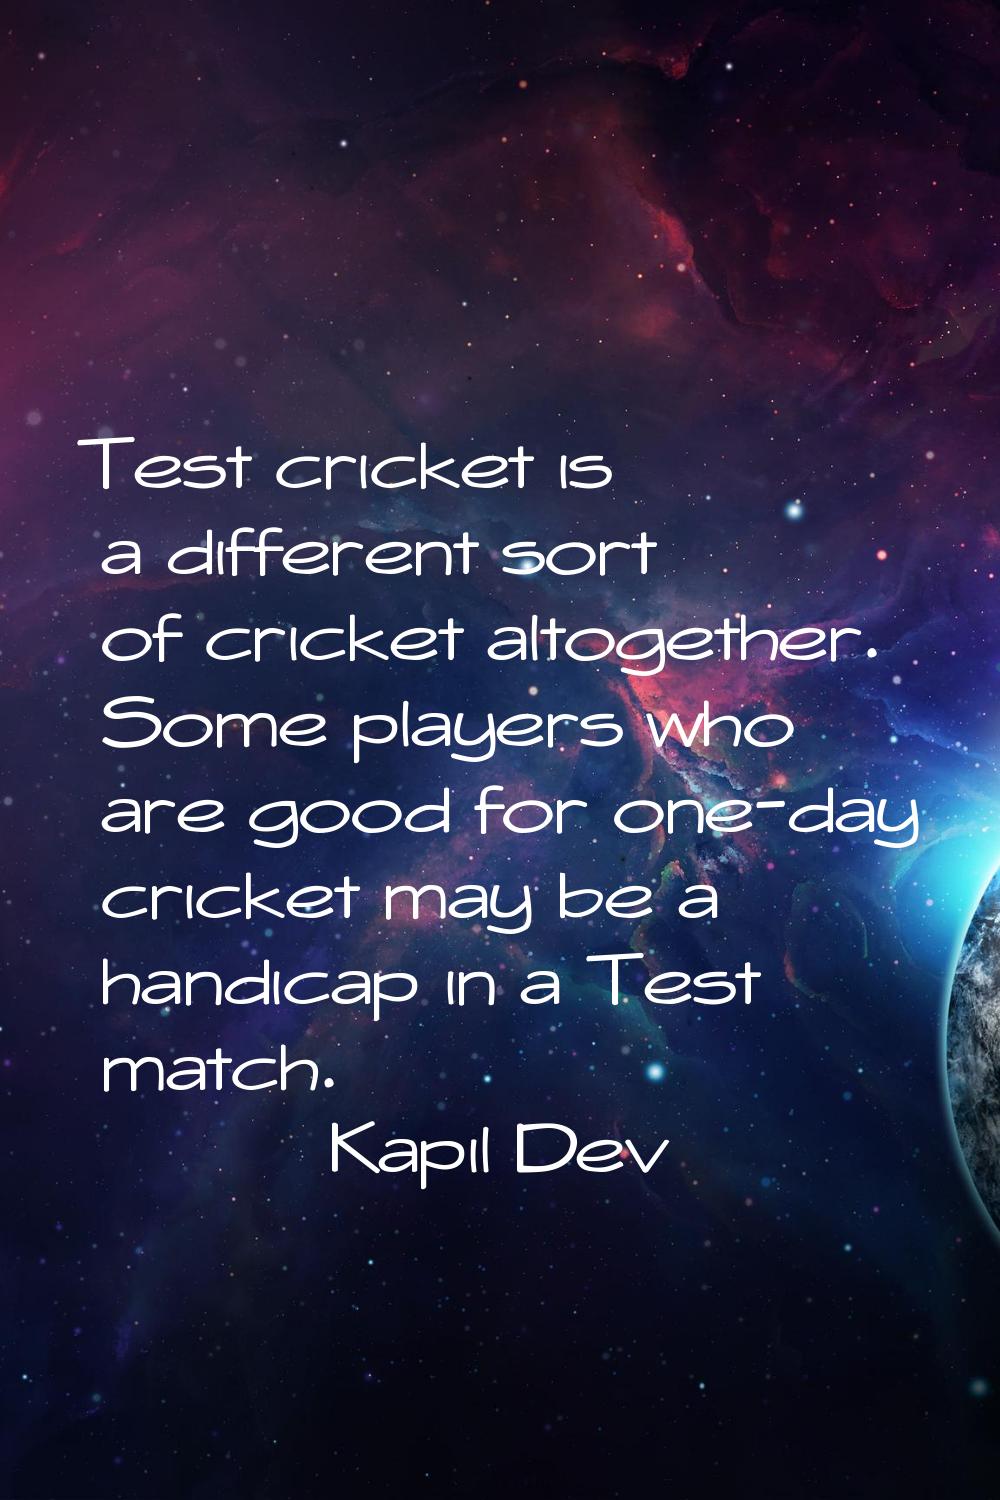 Test cricket is a different sort of cricket altogether. Some players who are good for one-day crick